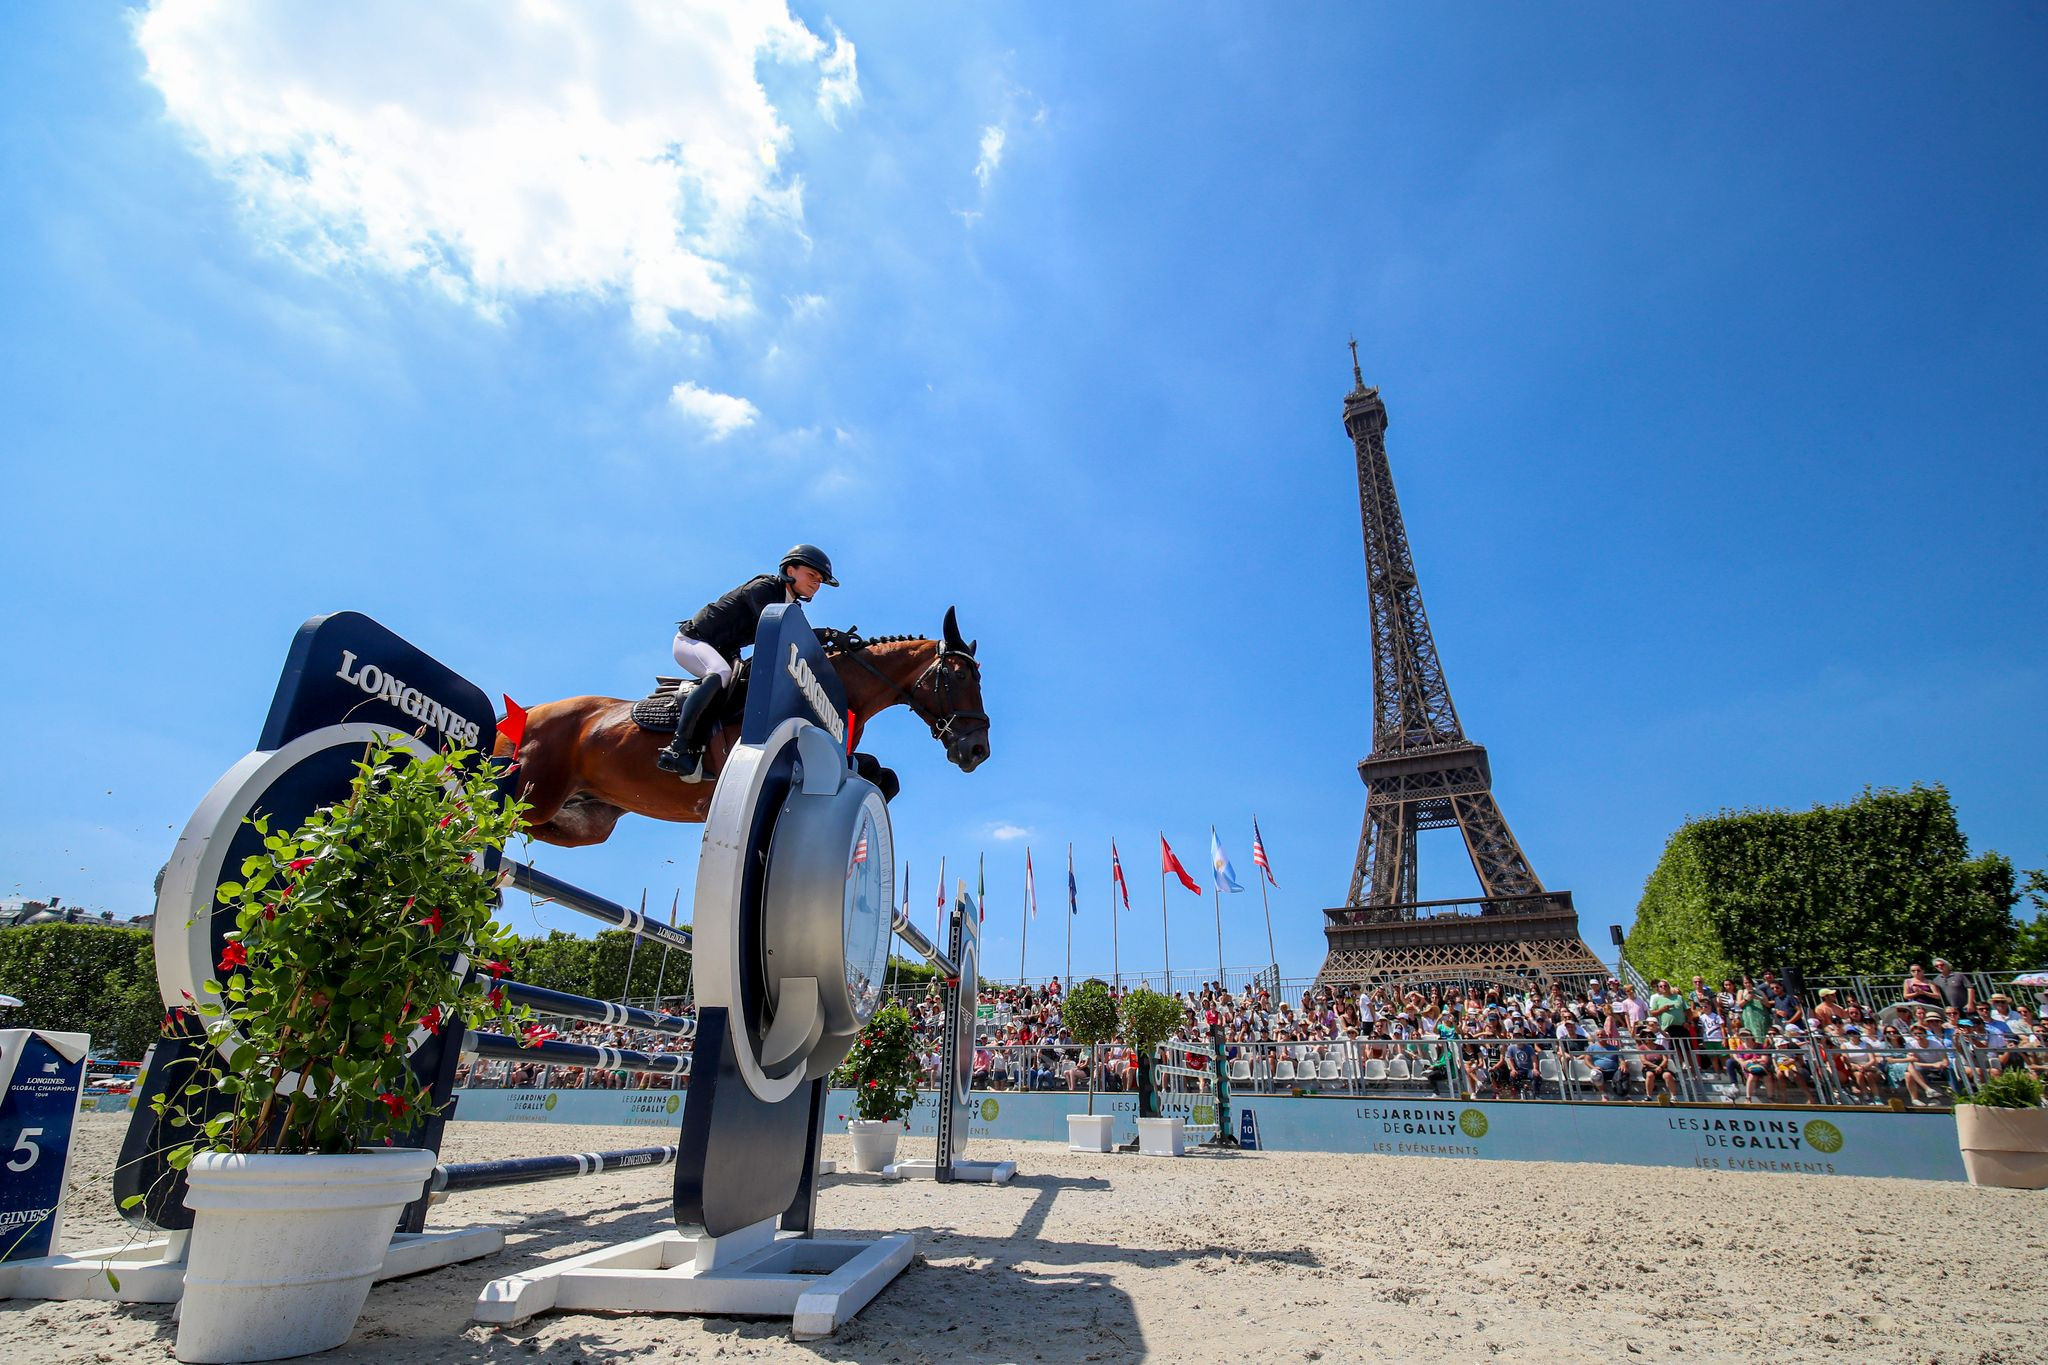 The Eiffel Tower provided a spectacular backdrop to the action at the Global Champions Tour leg in Paris ©Global Champions Tour